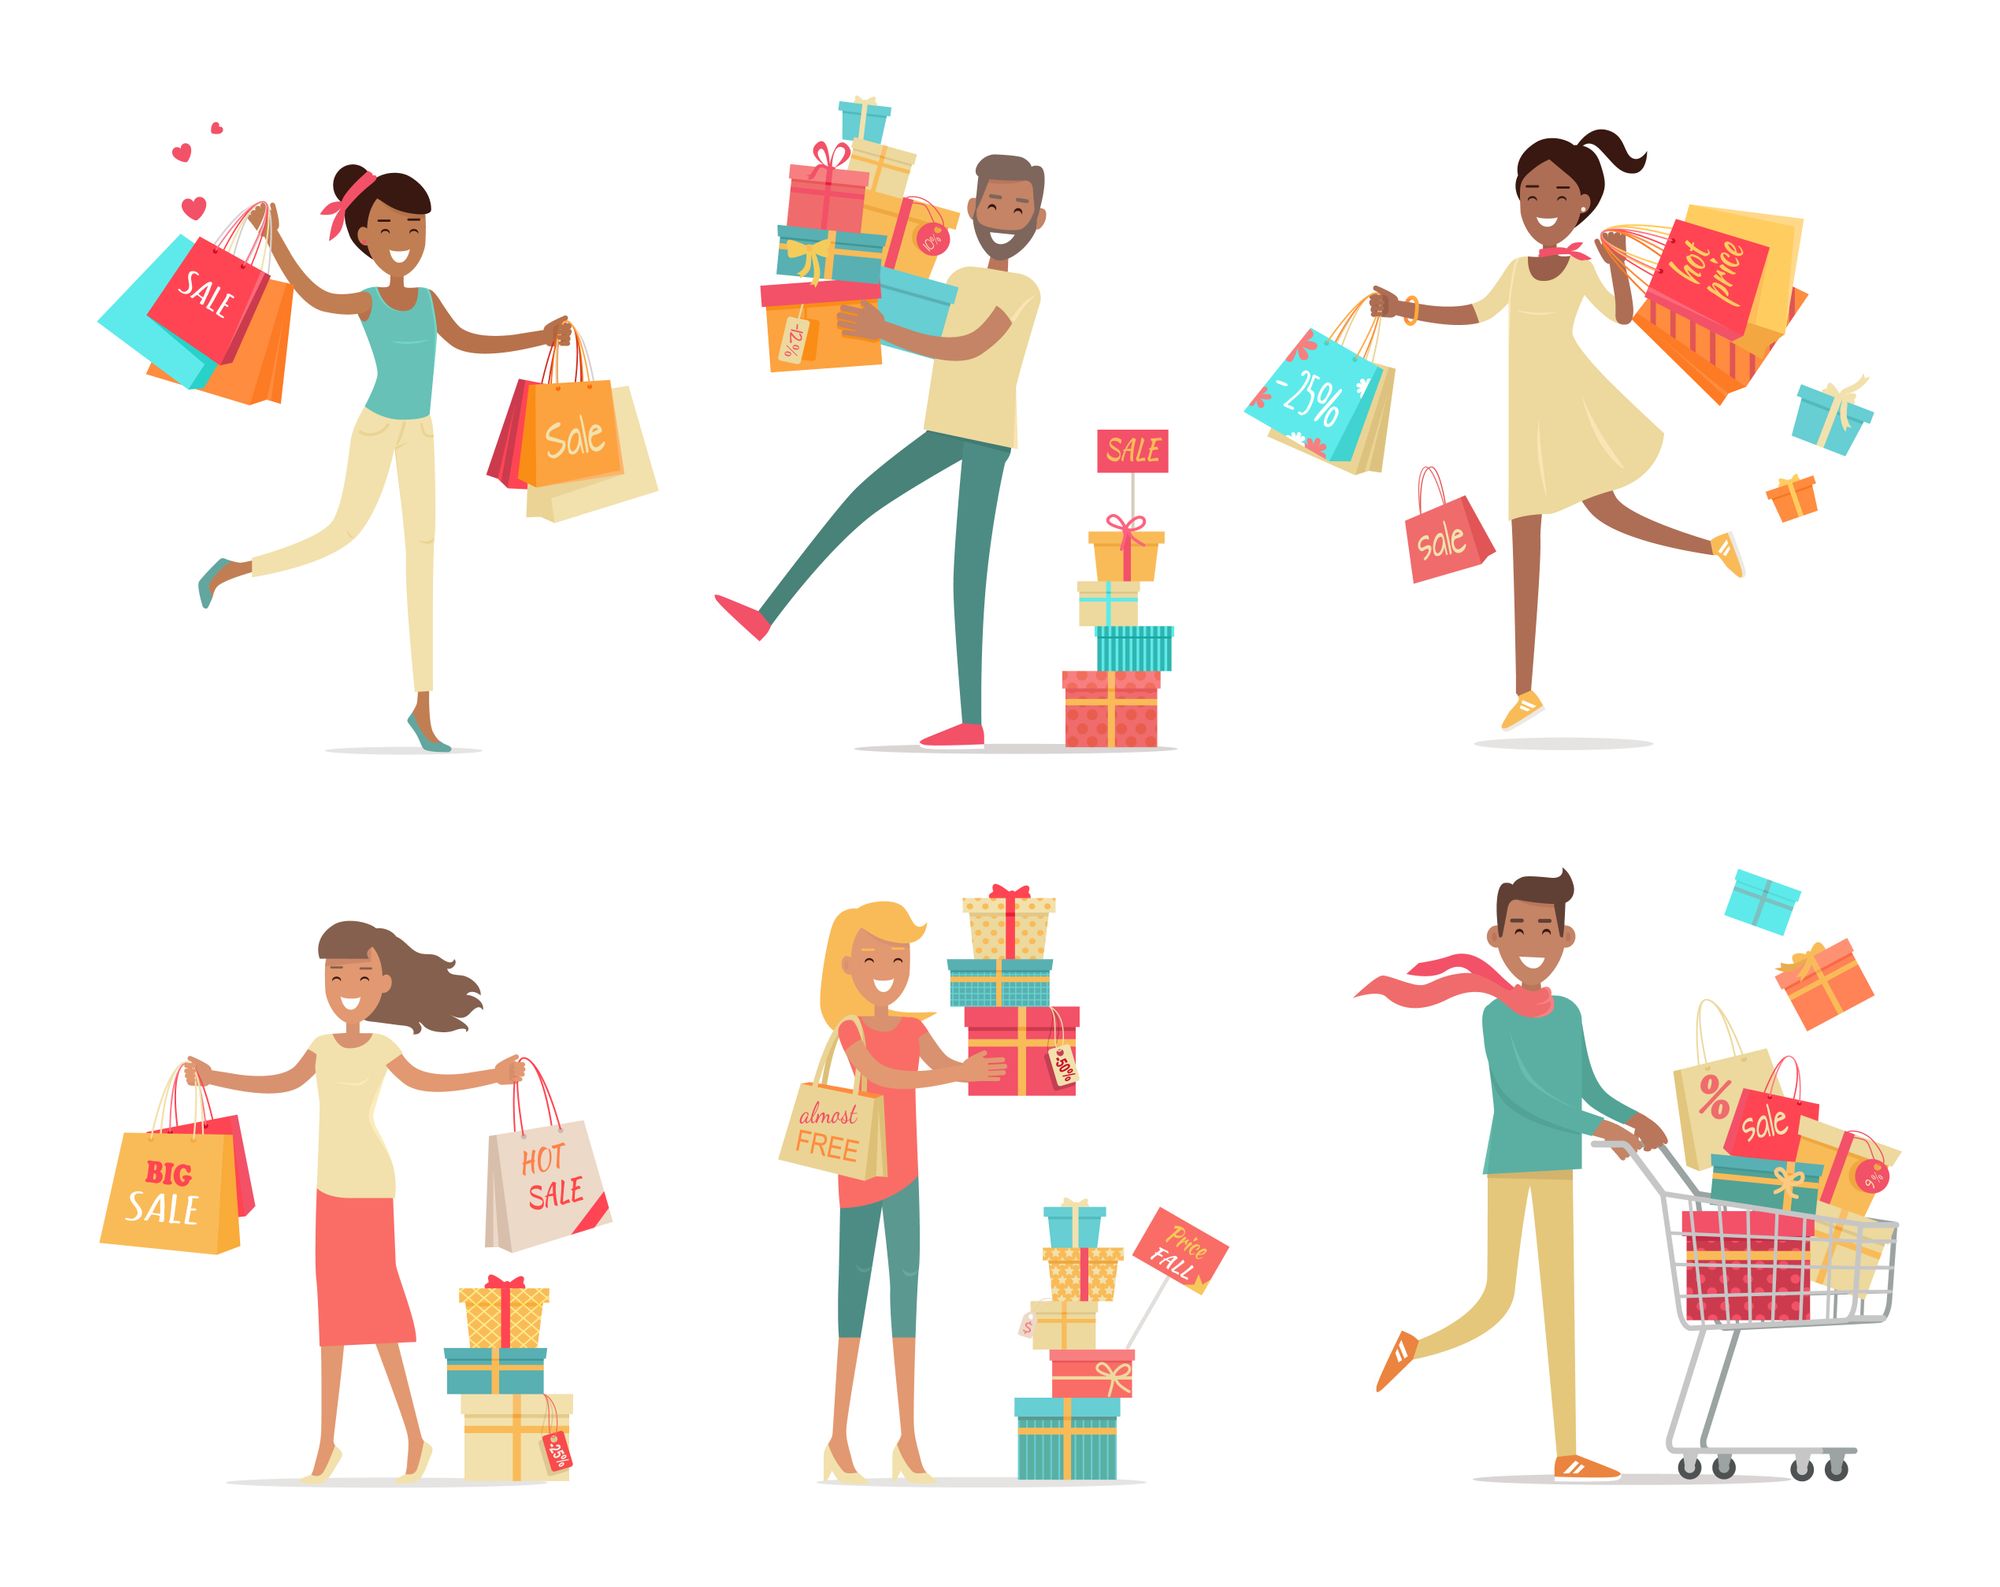 25 Shopping tips for the sales seasons